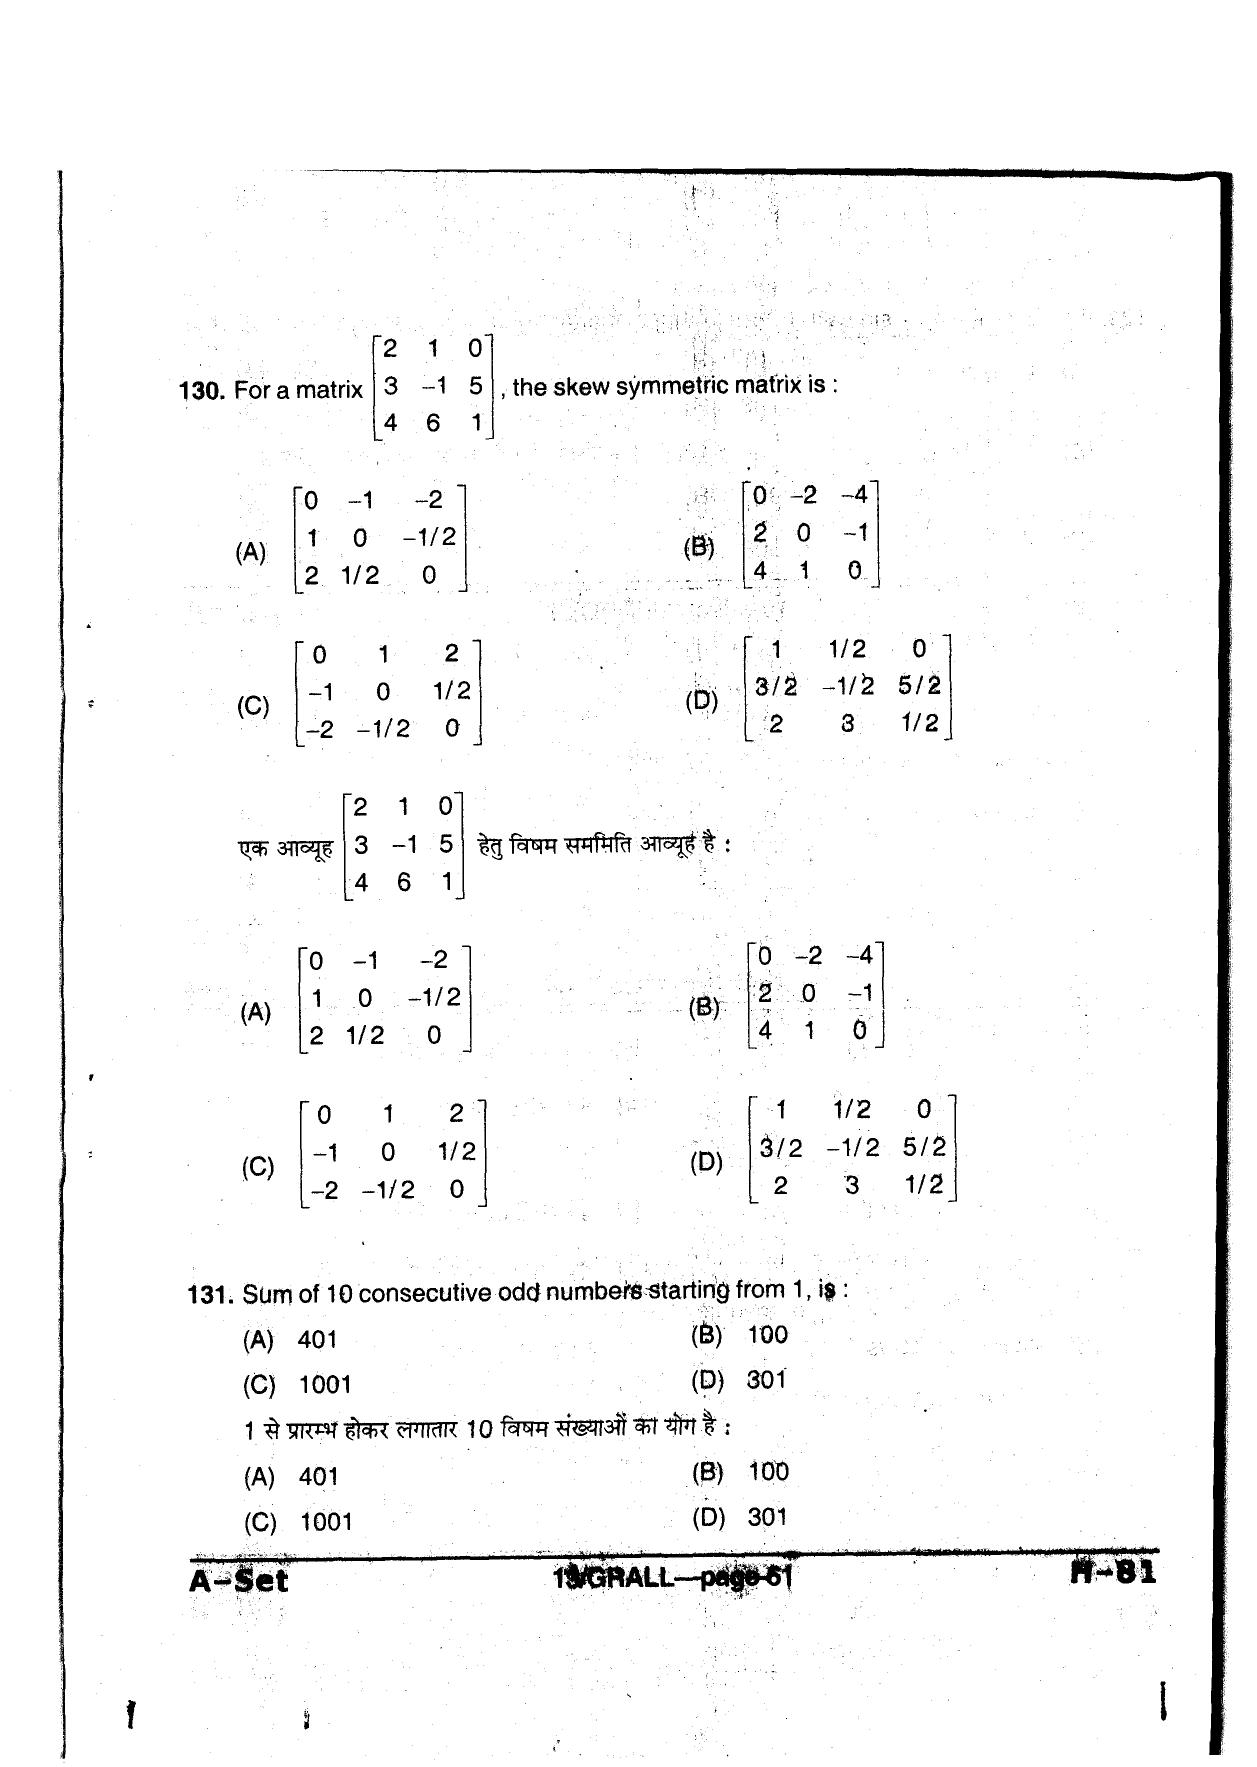 MP PAT 2013 Question Paper - Paper I - Page 61